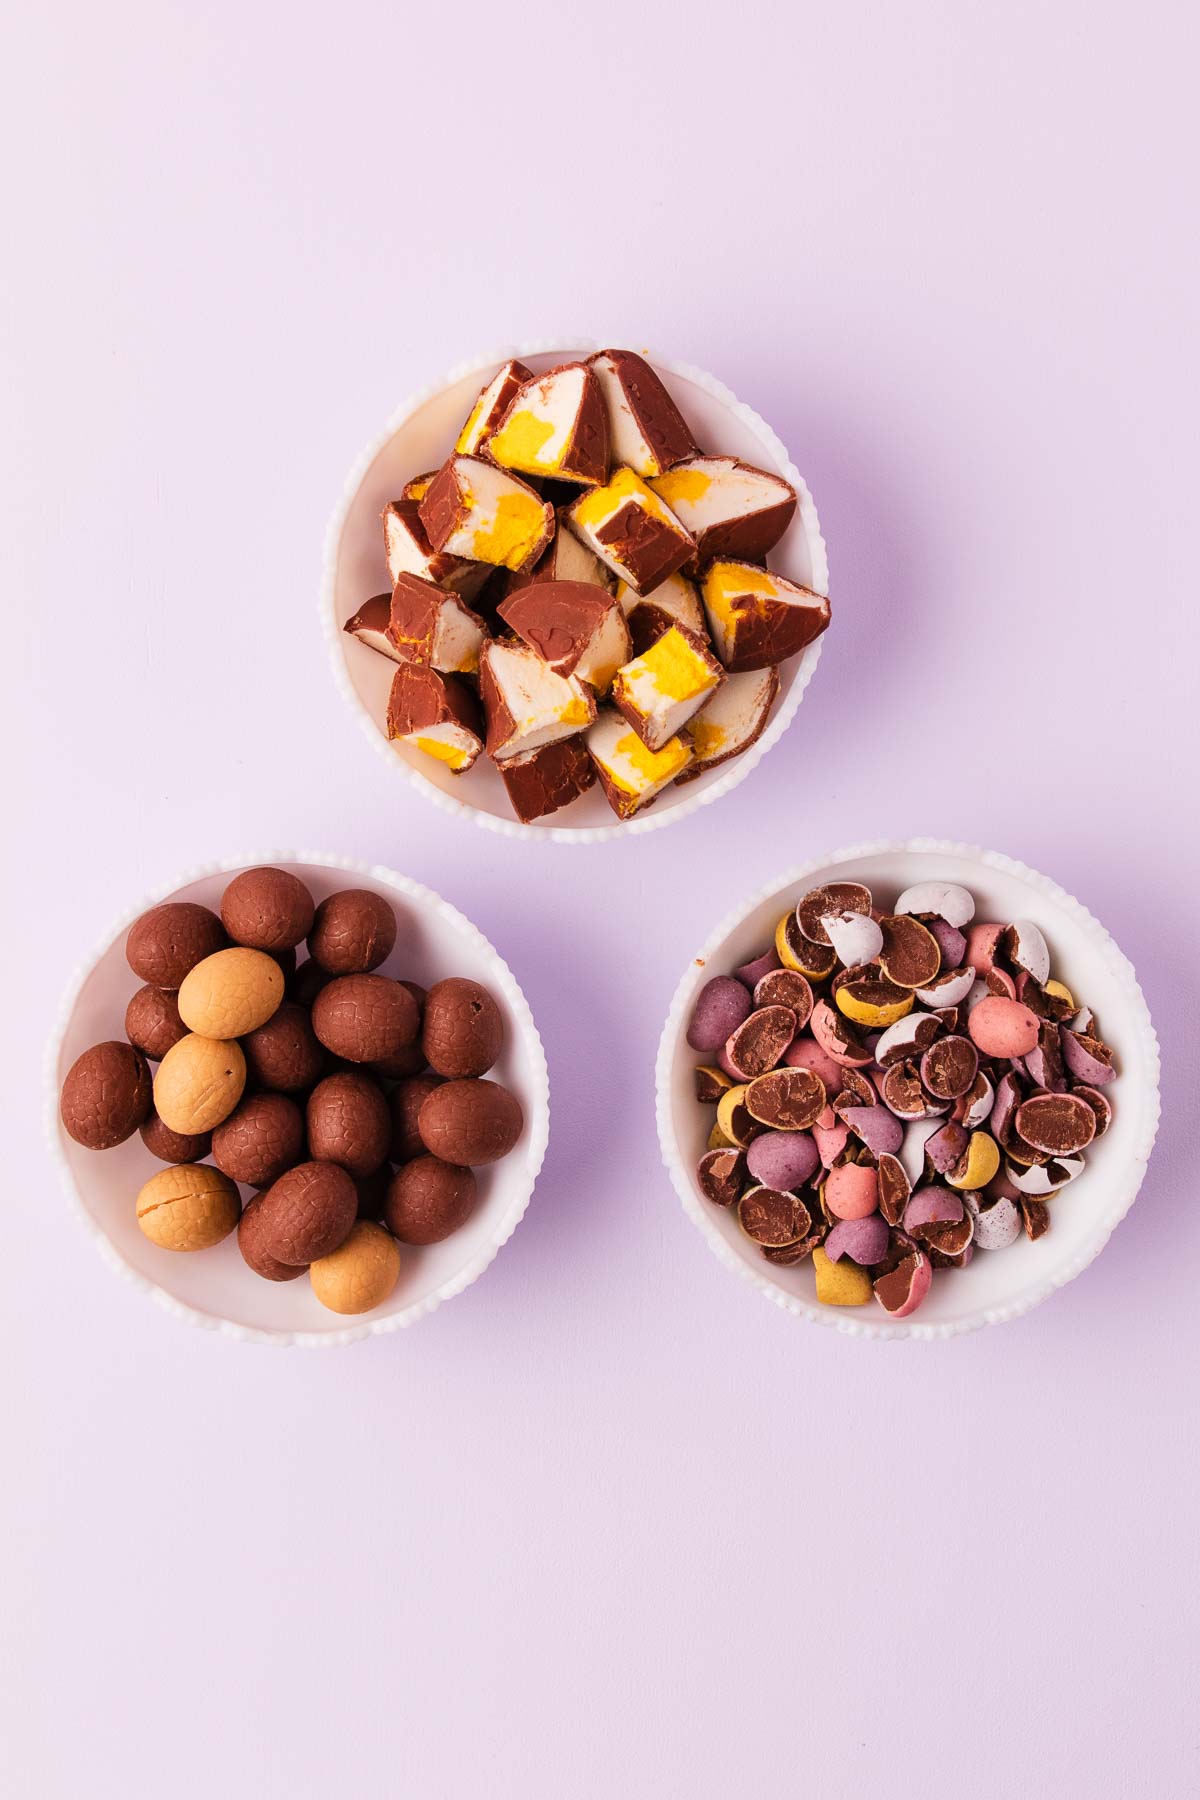 Three white bowls on a light purple background. One bowl has chopped marshmallow easter eggs, one has chopped candy-coated mini eggs and one has small whole plain chocolate eggs.